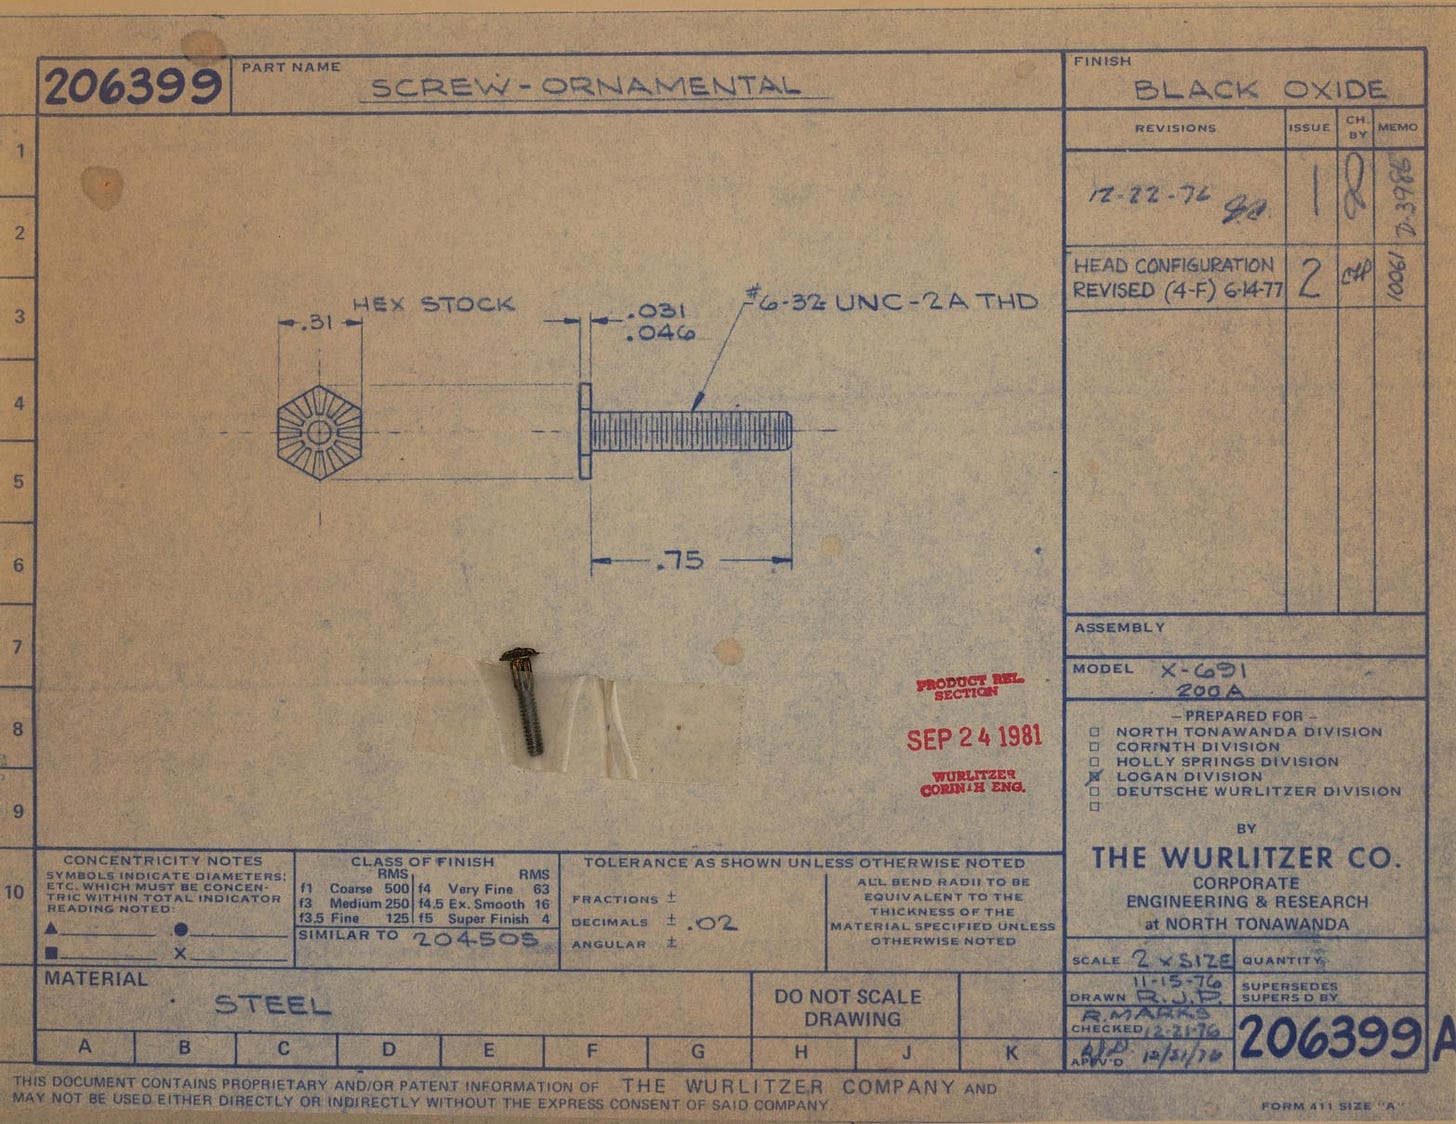 The blueprint drawing of the Wurlitzer 200a speaker screw, with a different speaker screw taped to it.